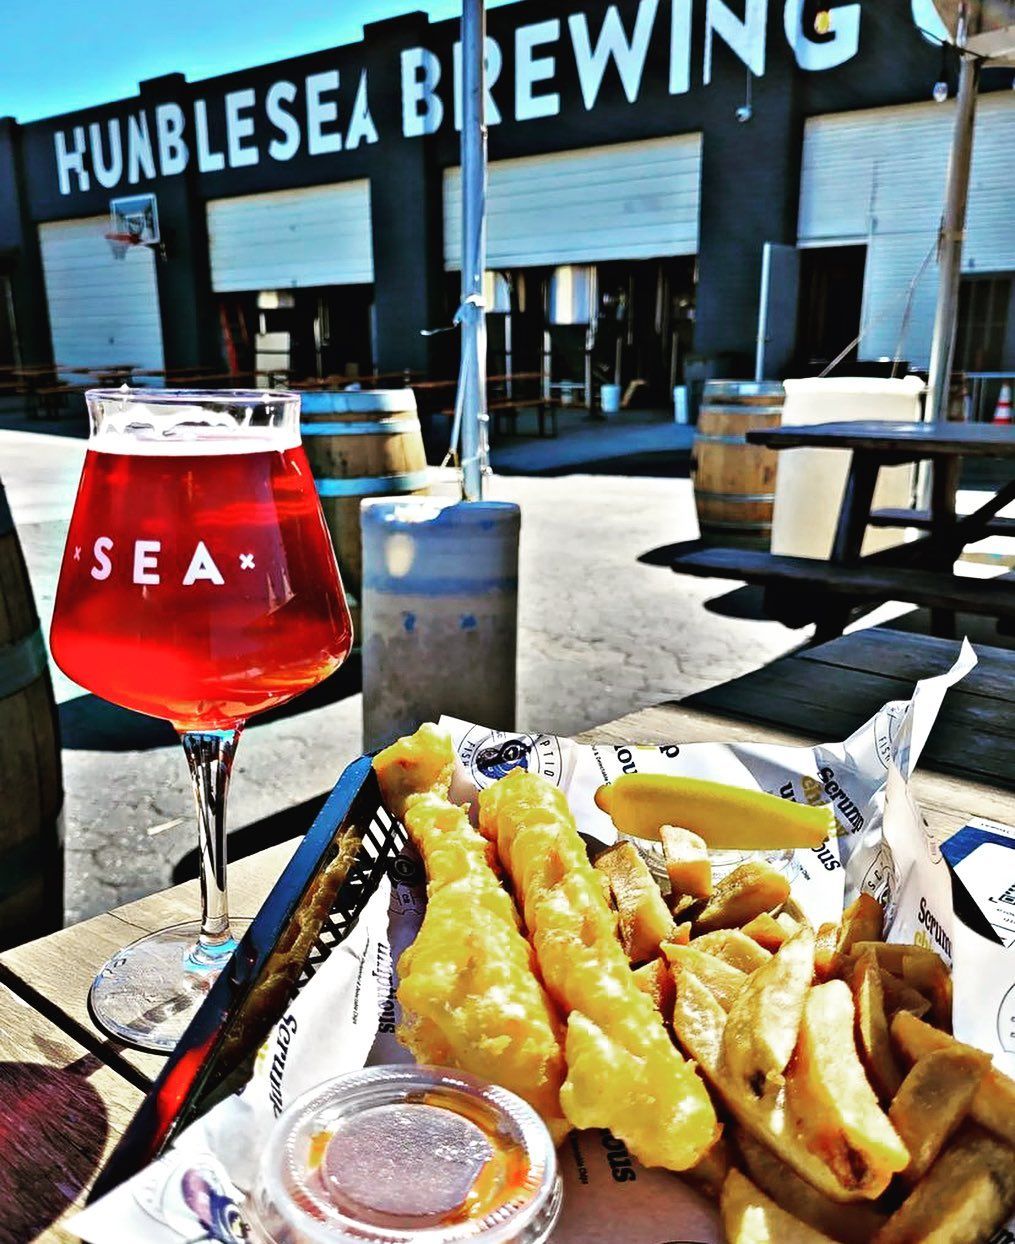 Scrumptious Fish & Chips @ Humble Sea Brewery